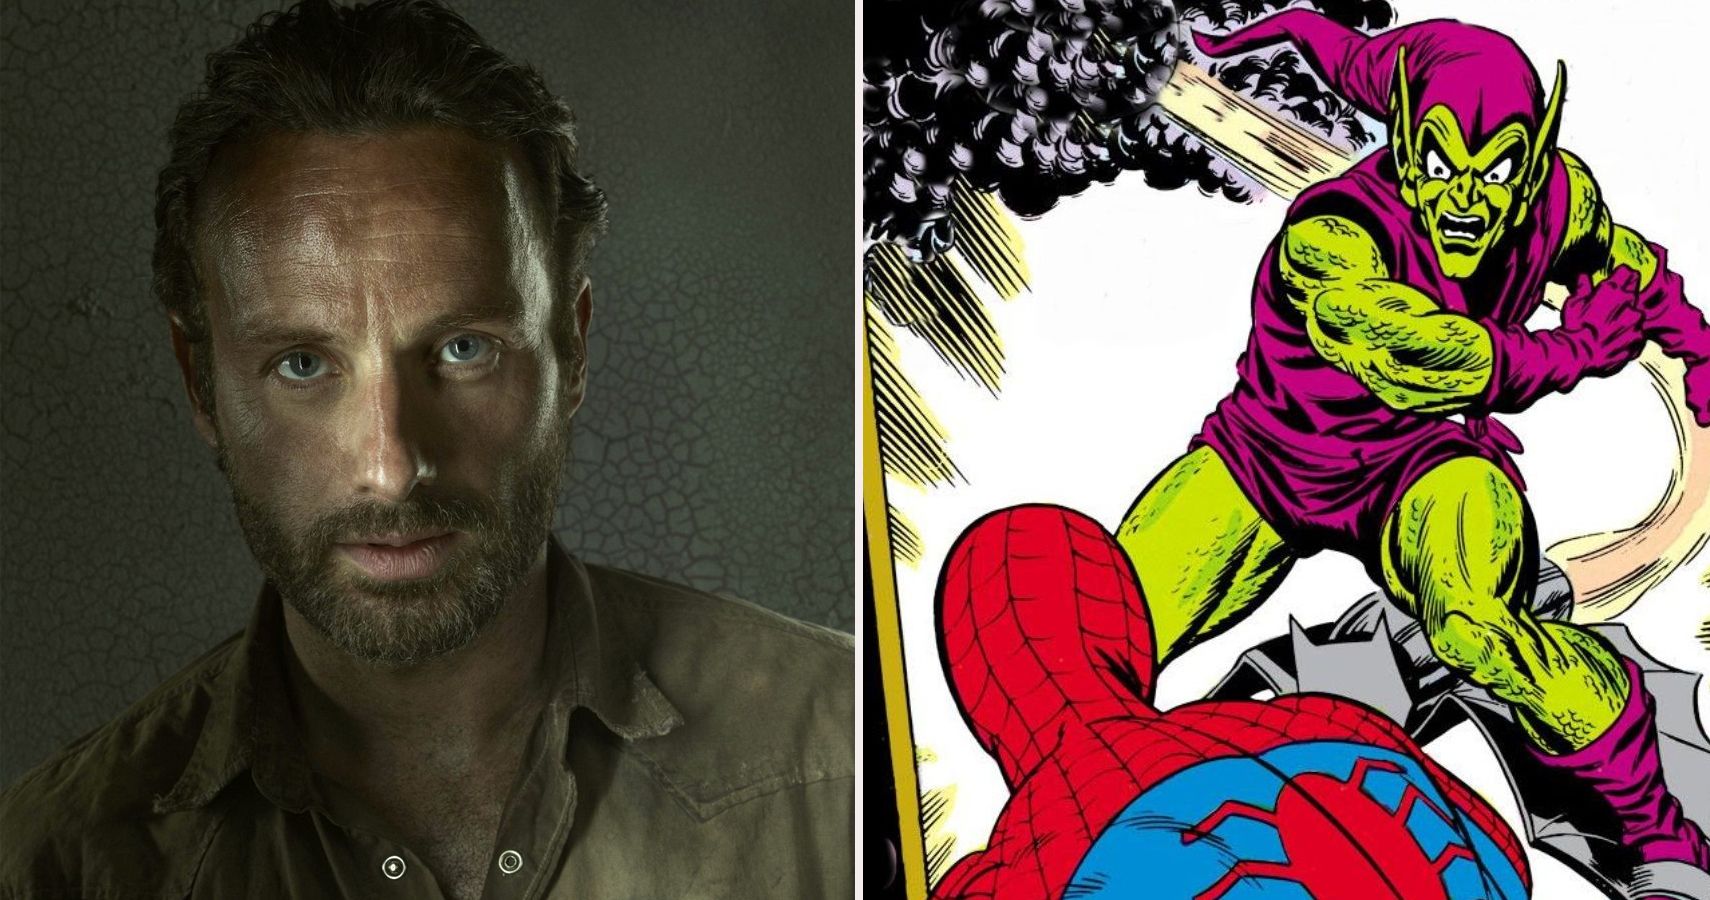 Green Goblin 10 Actors Who Could Glide and Strike Fear in the MCU